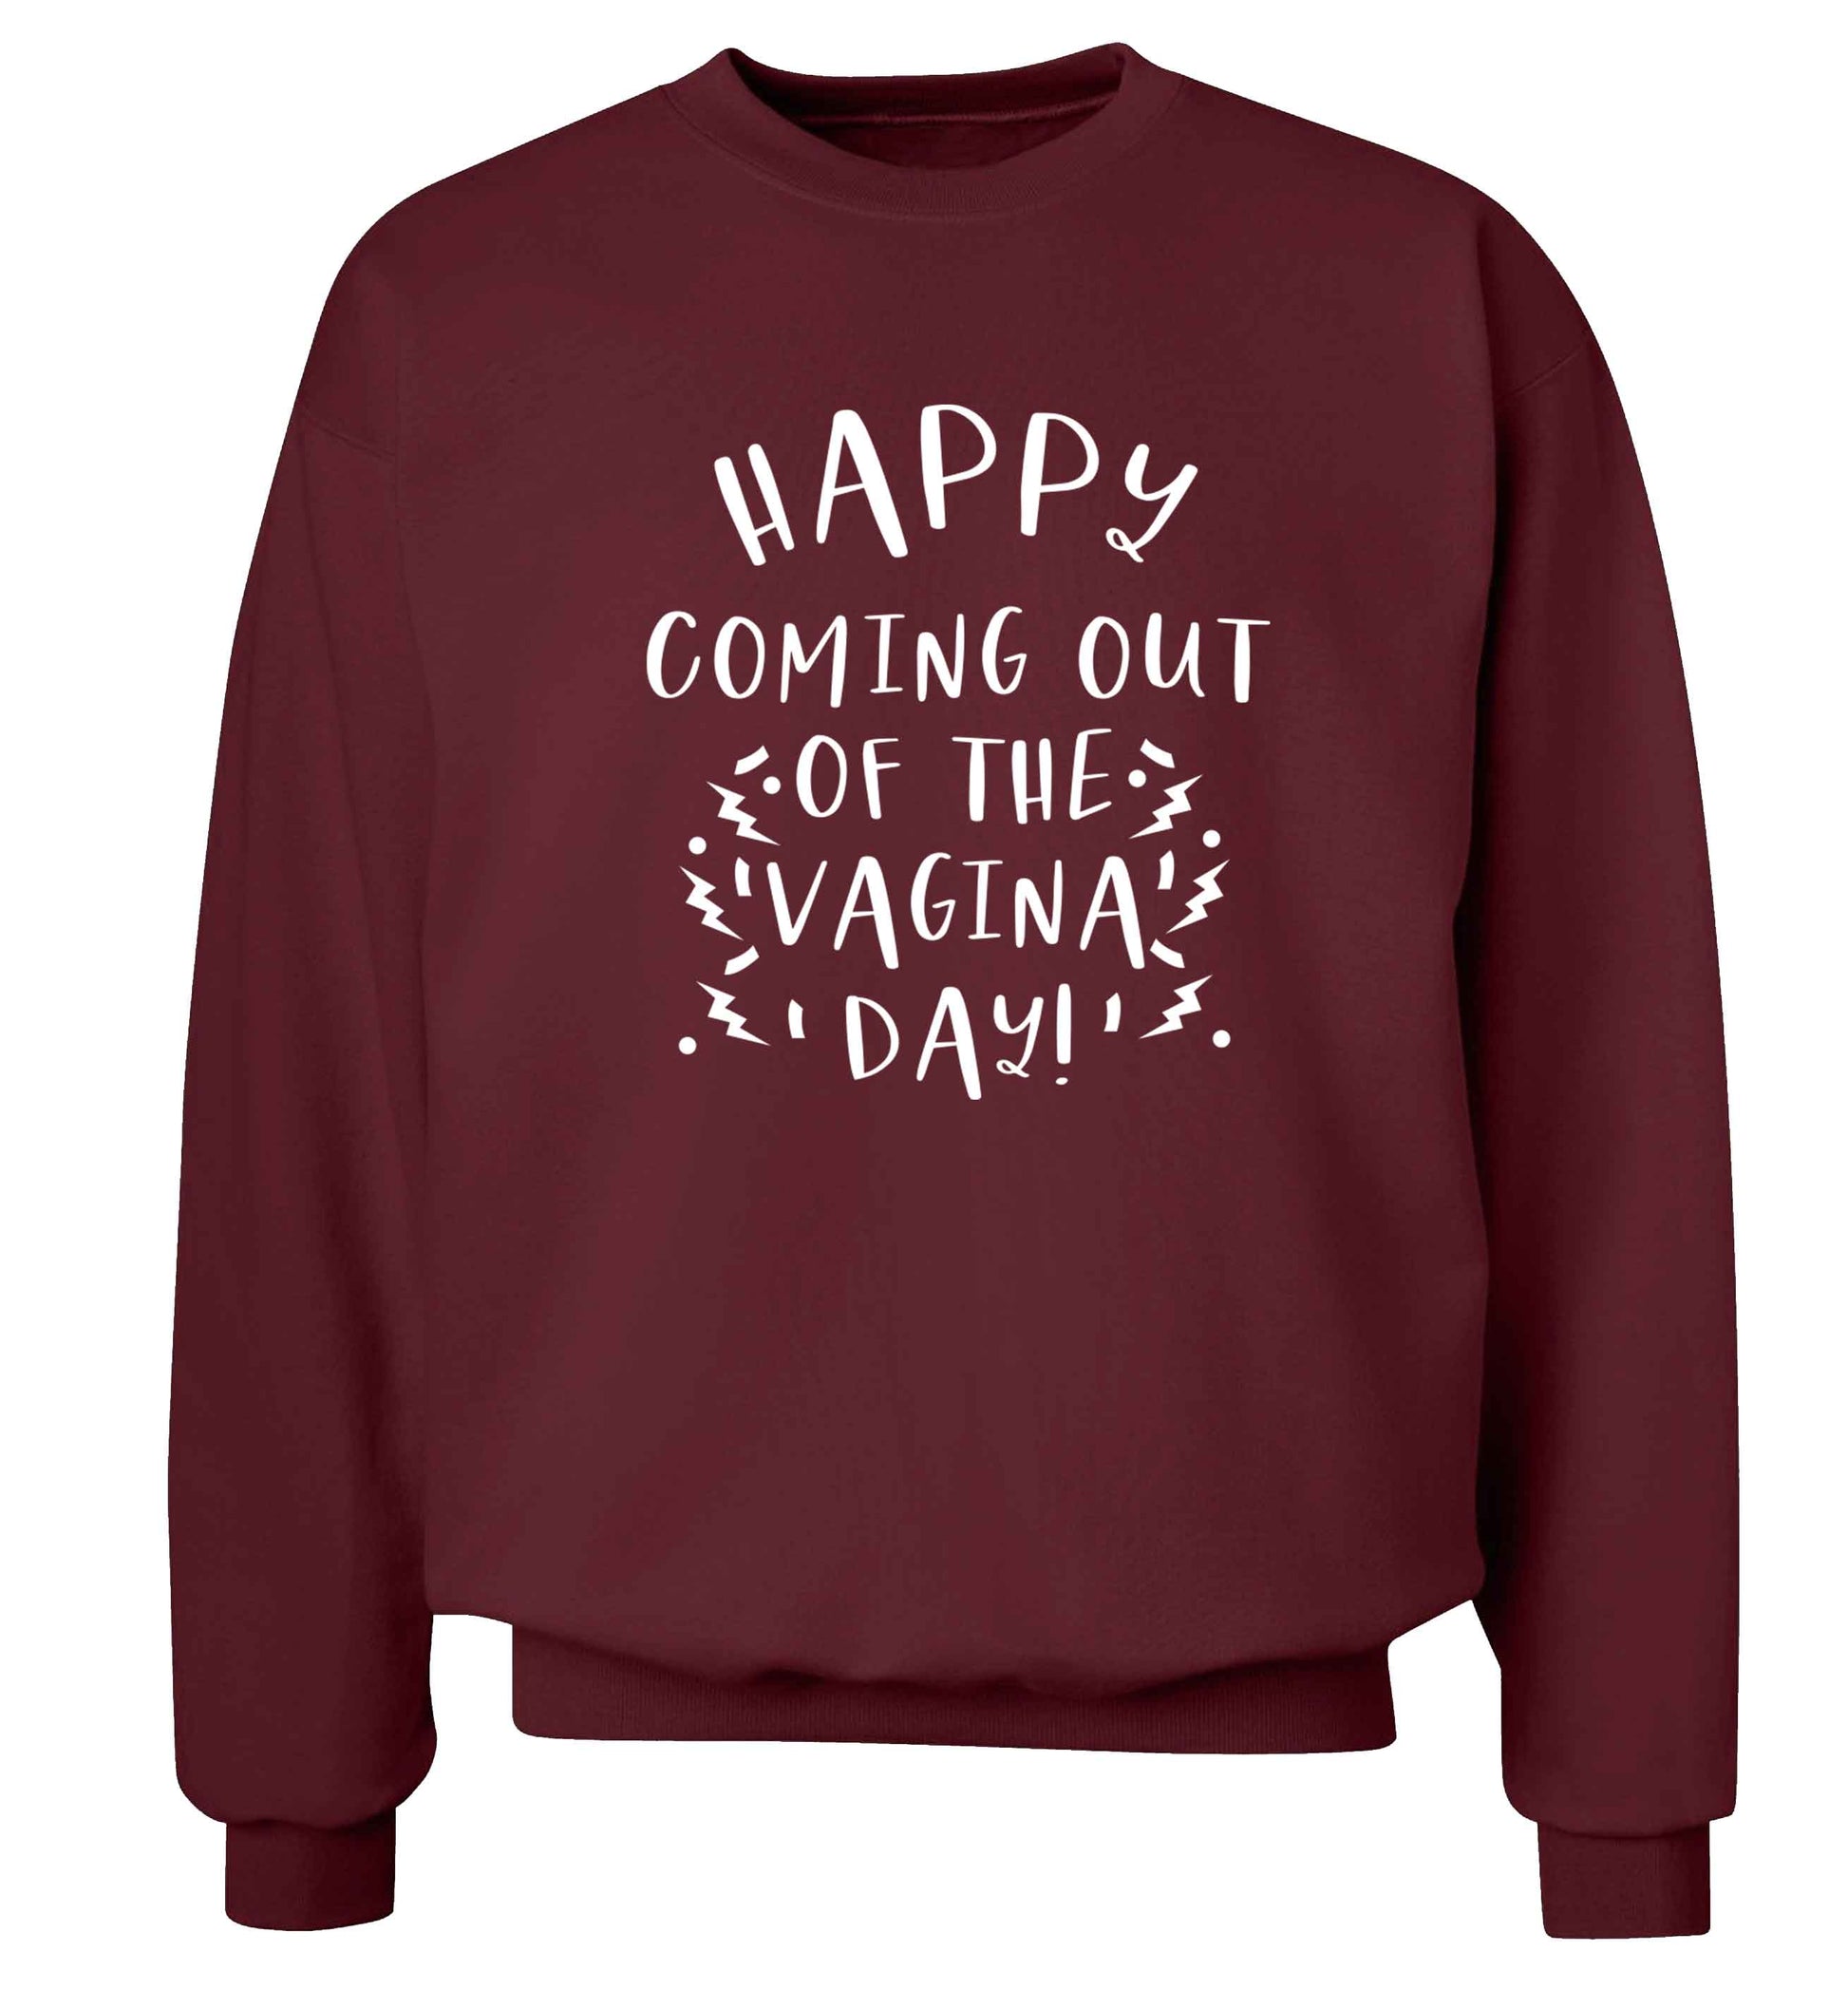 Happy coming out of the vagina day Adult's unisex maroon Sweater 2XL